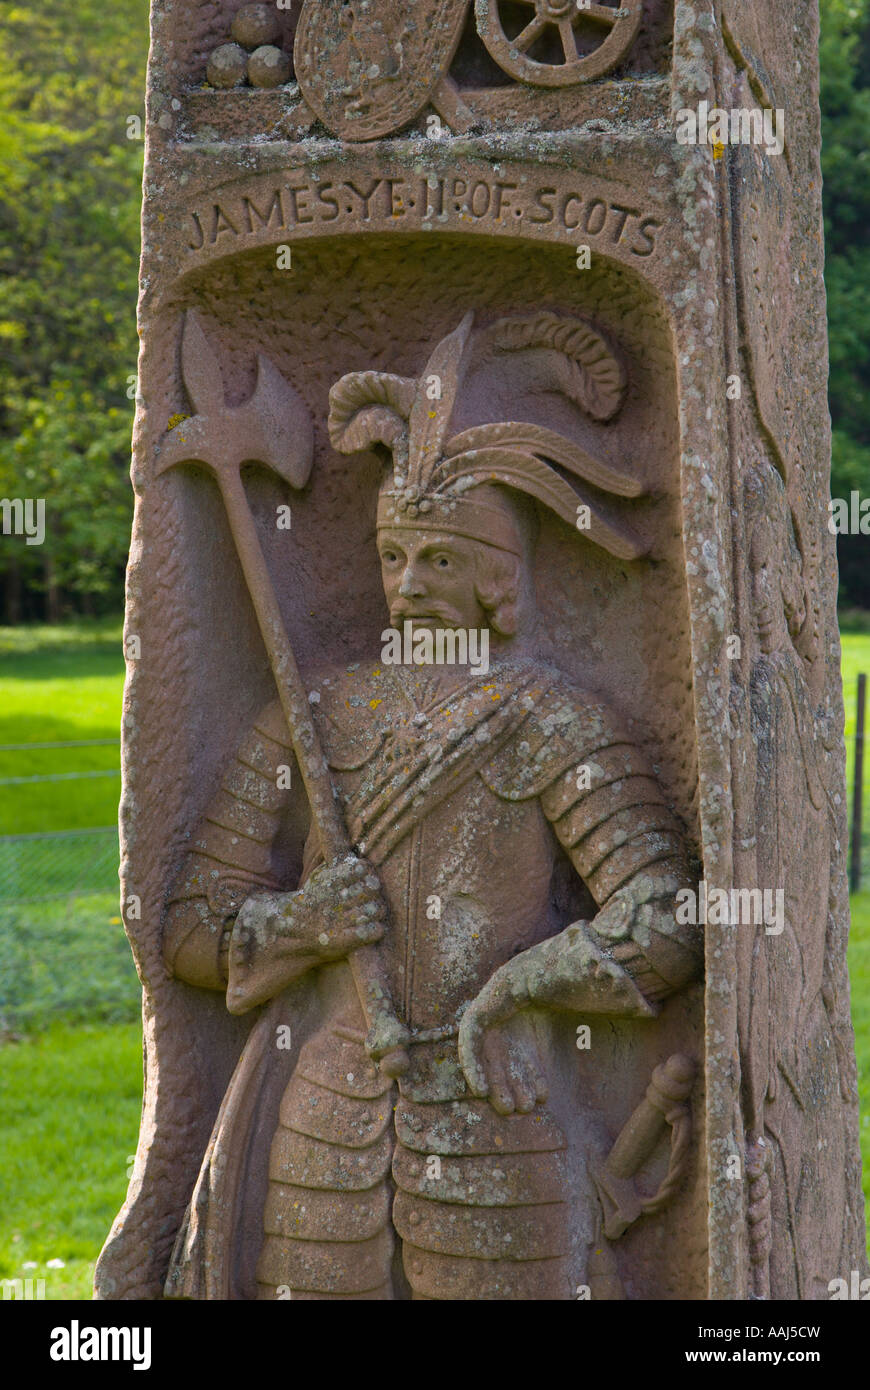 King James II of Scotland represented on a carved obelisk at Dryburgh Abbey Scotland Stock Photo